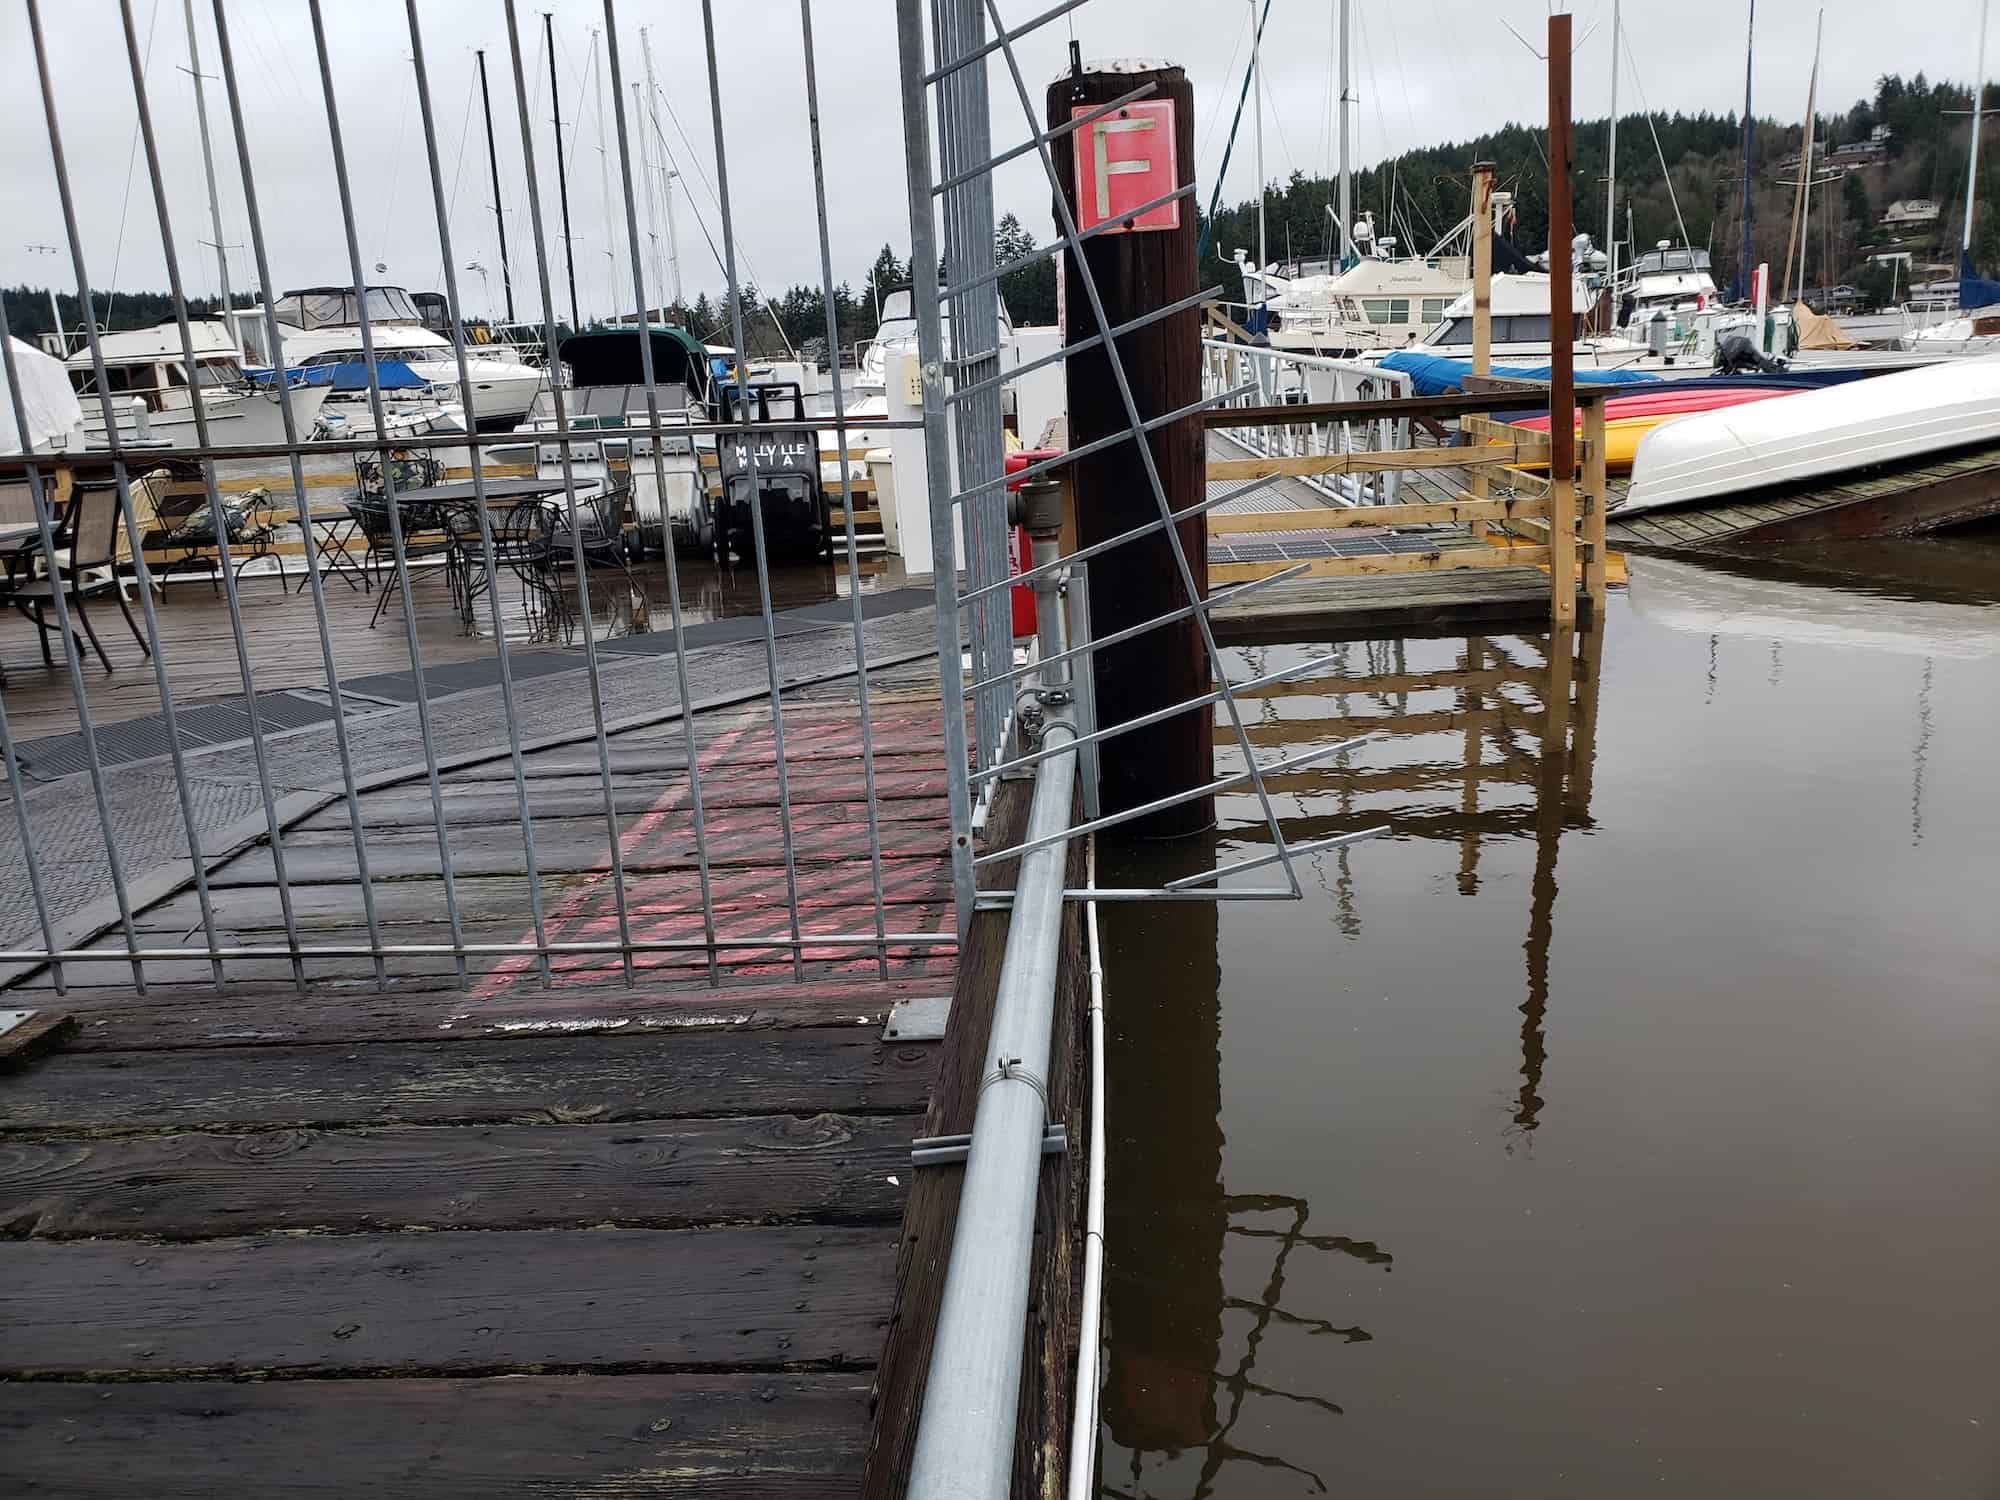 Linda Glein snapped a shot at Millville Marina on Friday of the floating dinghy dock getting caught under the stationary dock.